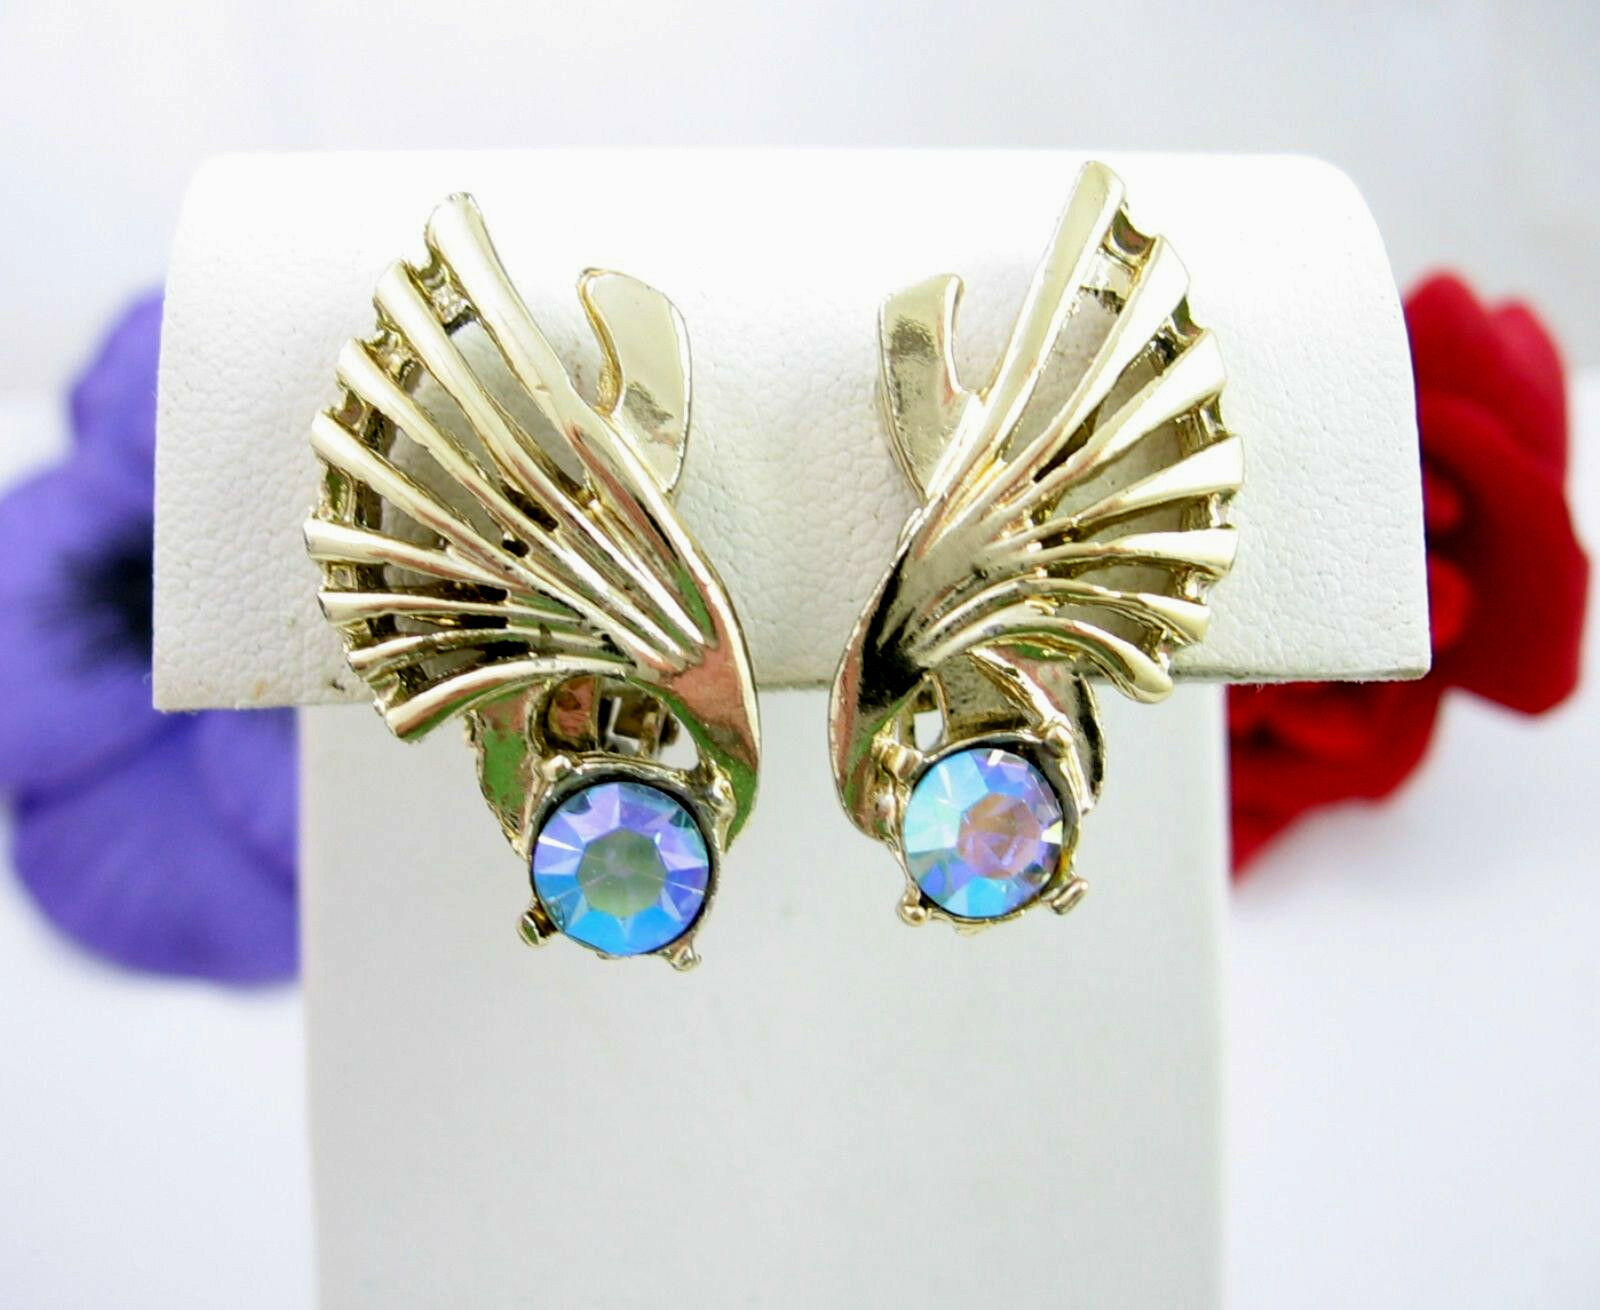 Primary image for FAN Wings EARRINGS Vintage Aurora Borealis AB Rhinestone Goldtone Clip On Clips